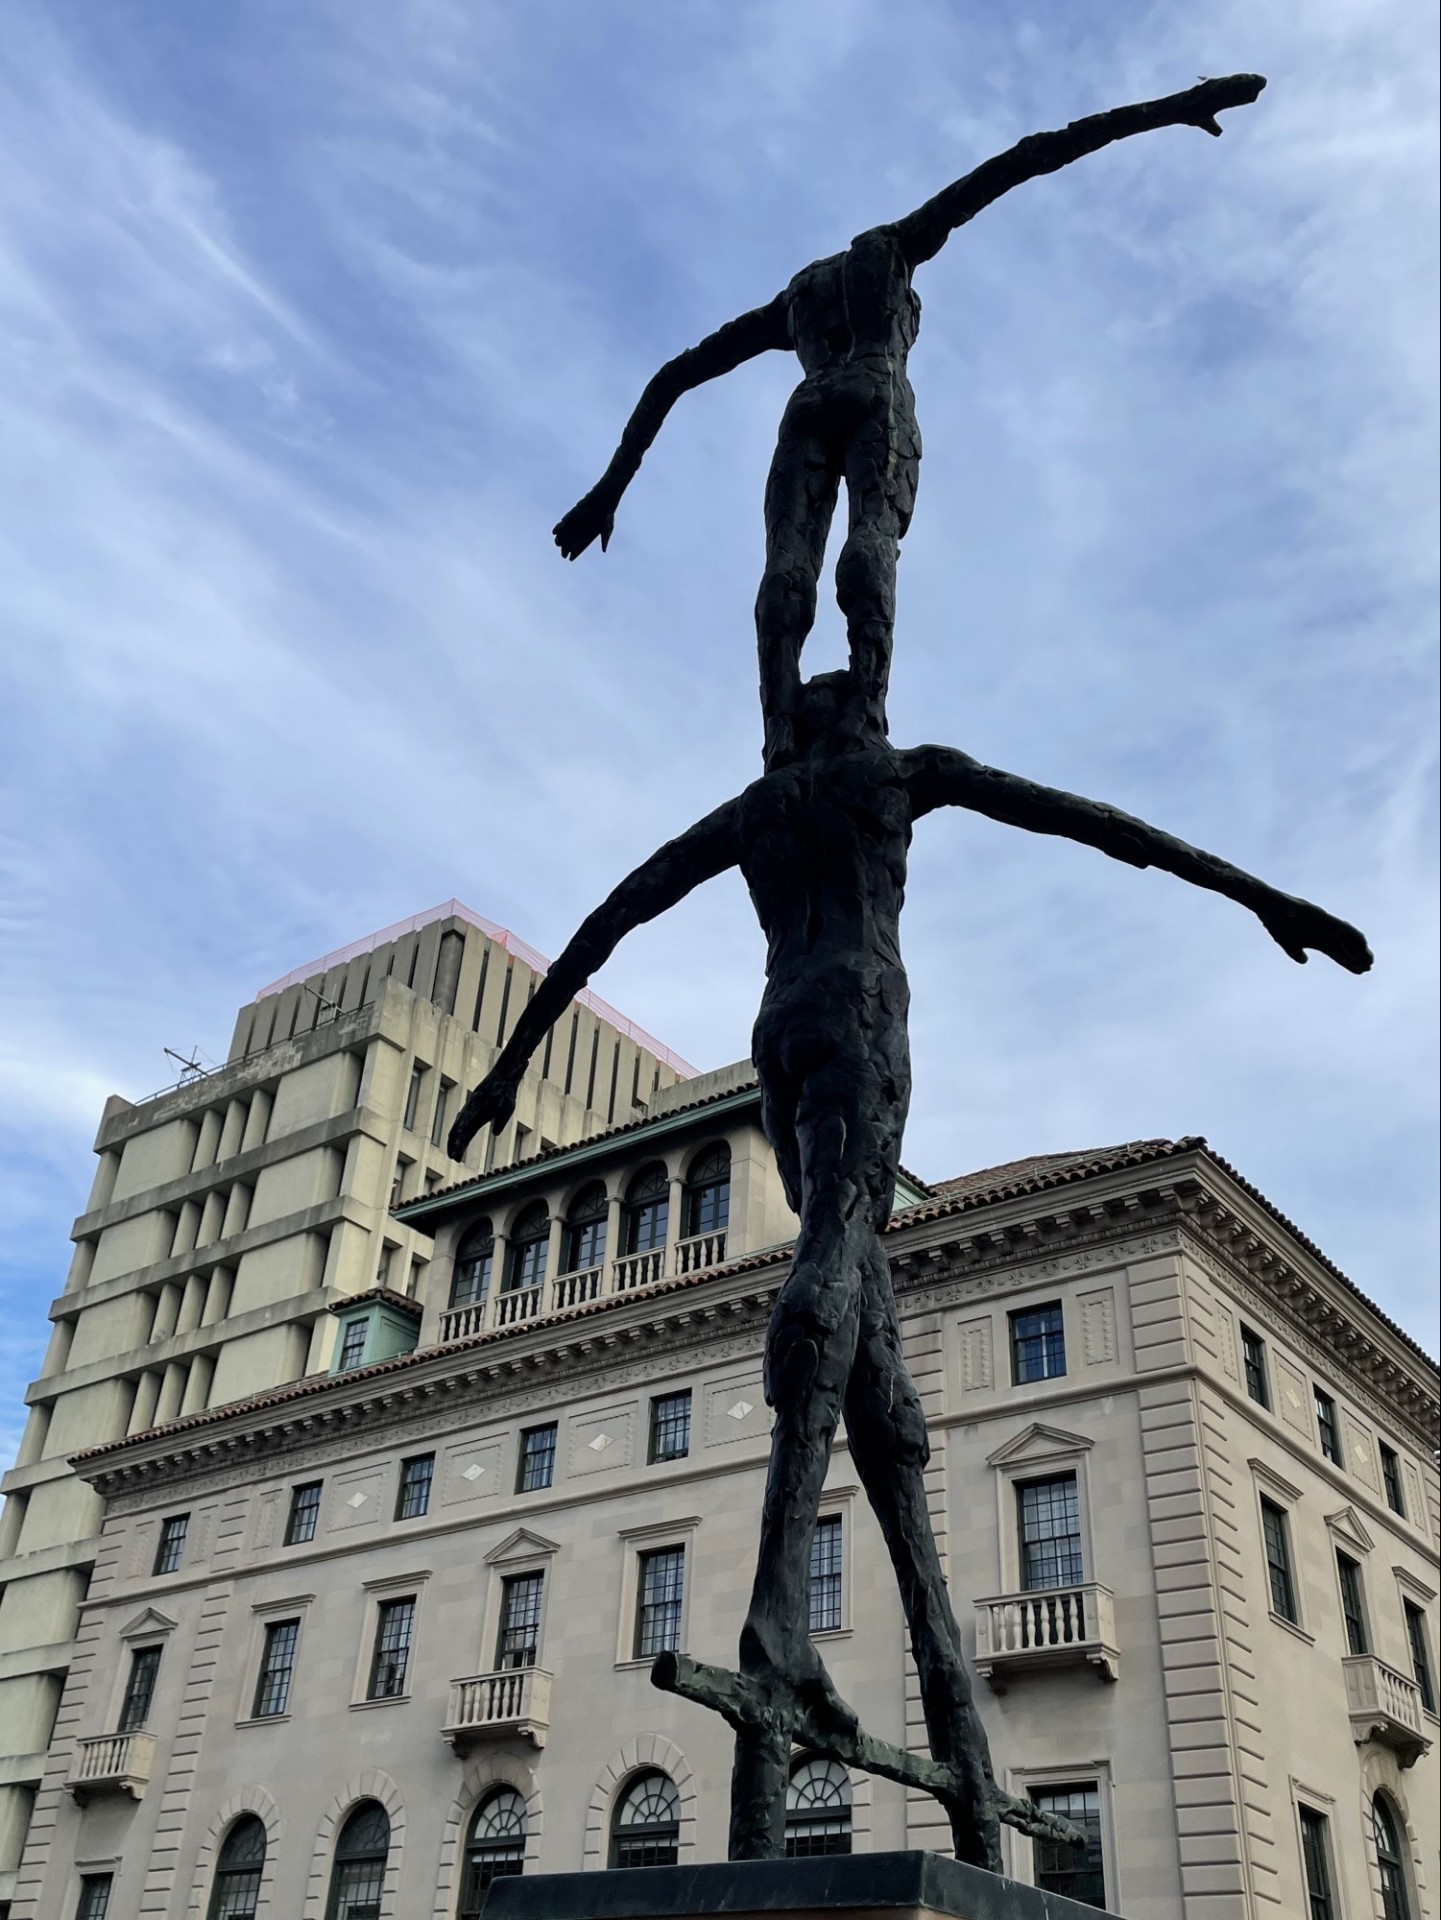 Tightrope Walker, a sculpture created by the Dutch artist Kees Verkade as a tribute to General William J. "Wild Bill" Donovan, a graduate of Columbia College and Columbia Law Schoo installed on Revson Plaza in 1979.